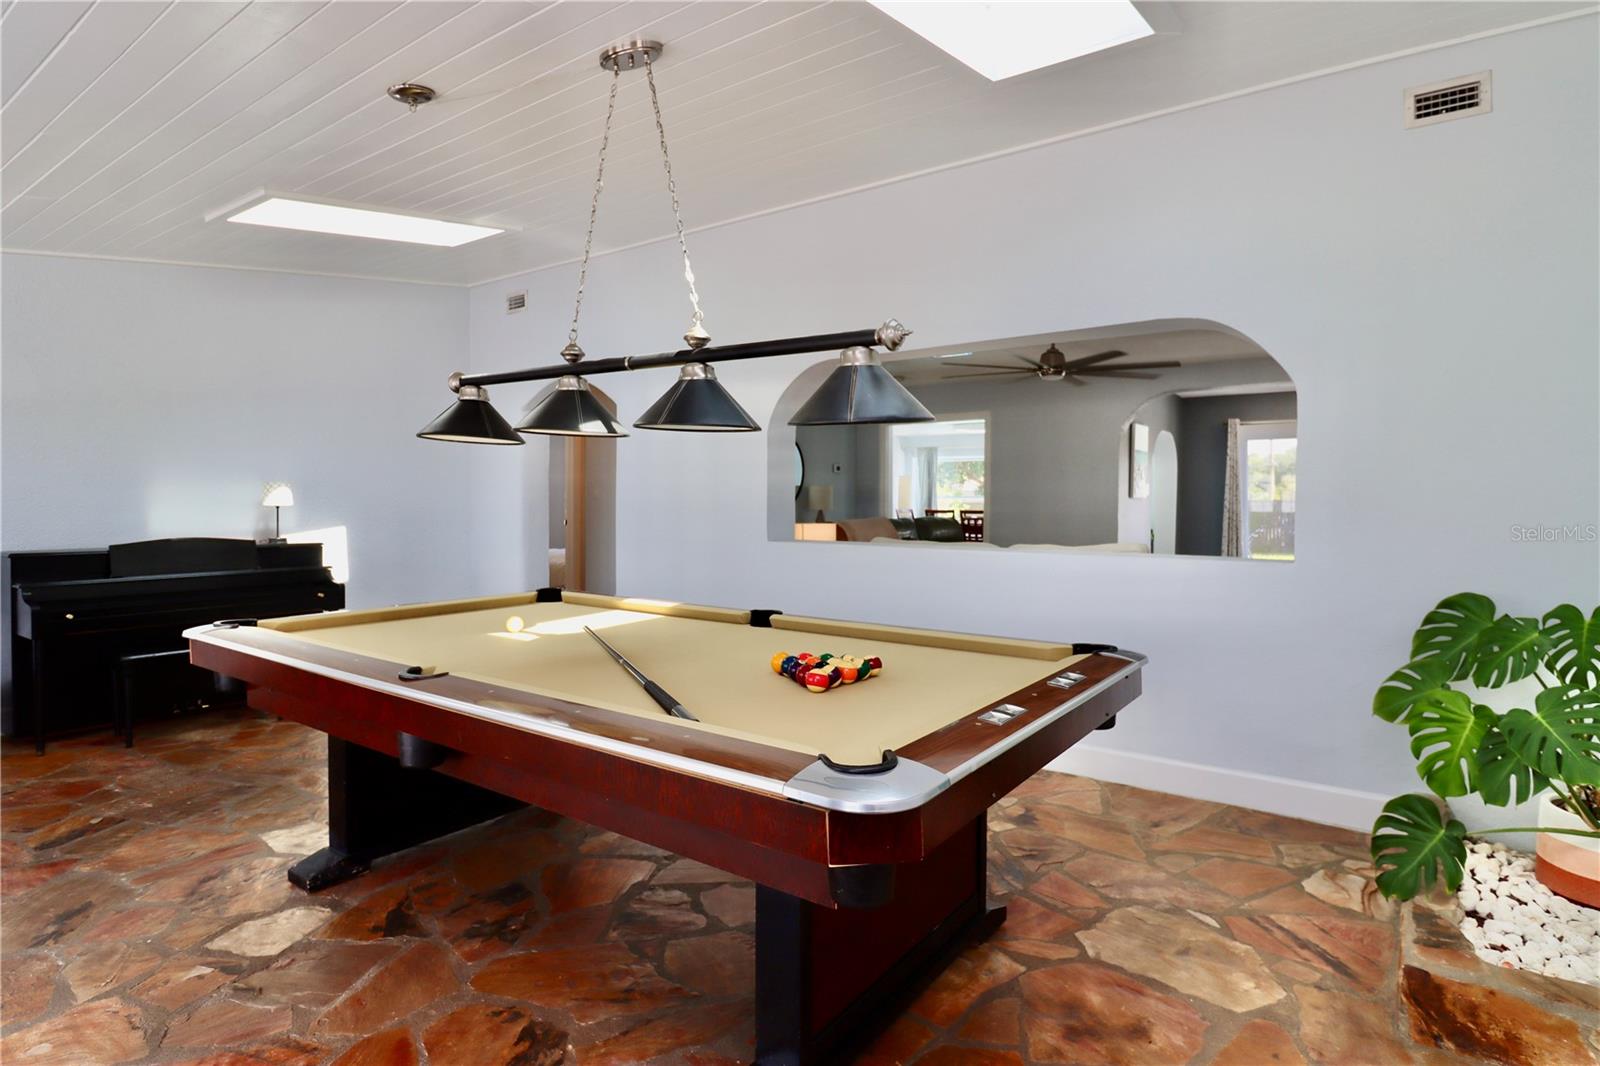 Game room, pool table is available.